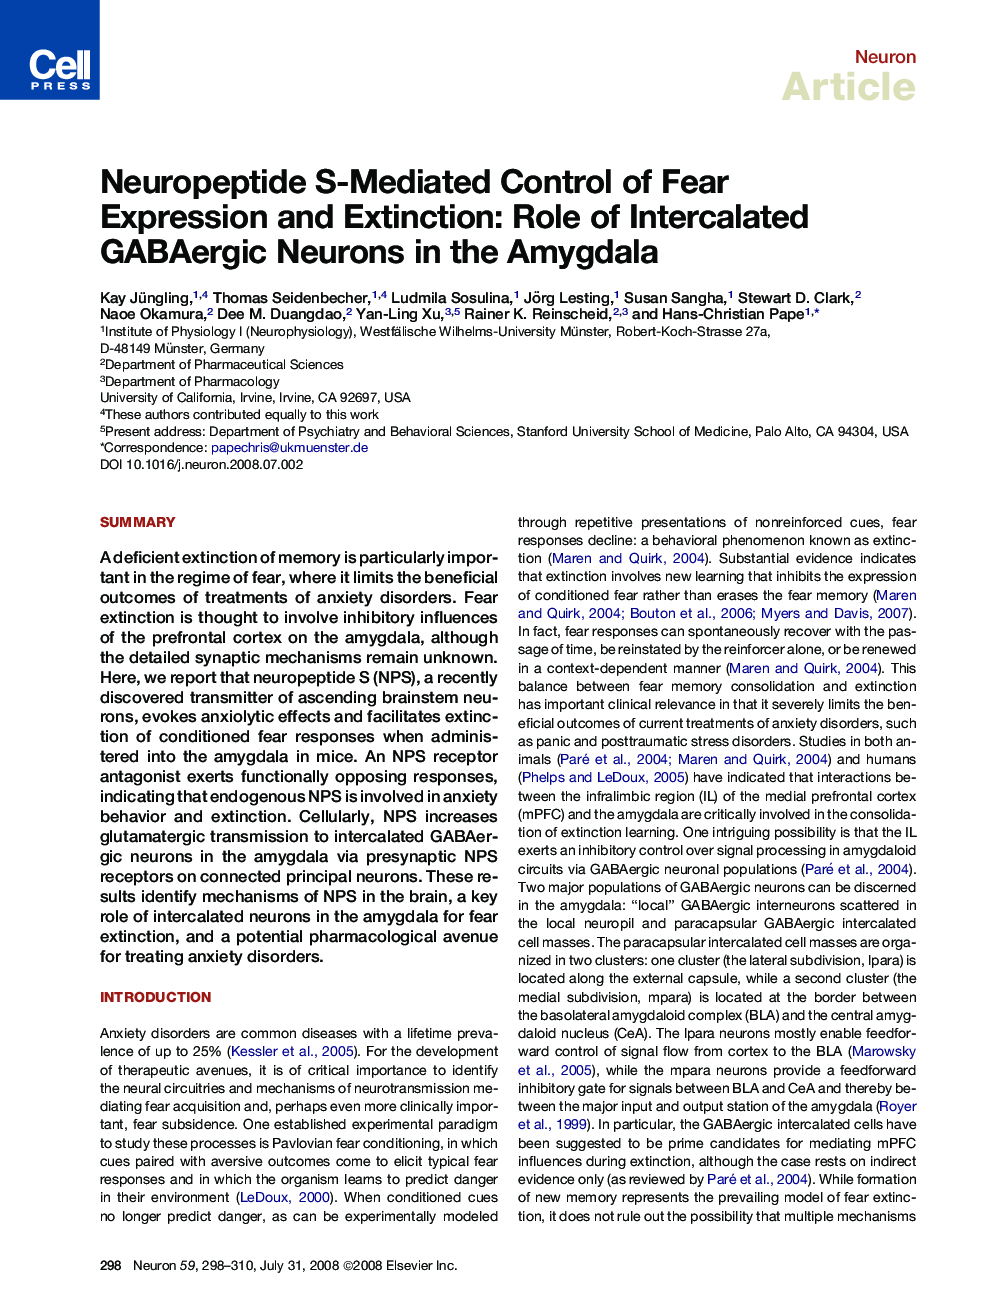 Neuropeptide S-Mediated Control of Fear Expression and Extinction: Role of Intercalated GABAergic Neurons in the Amygdala